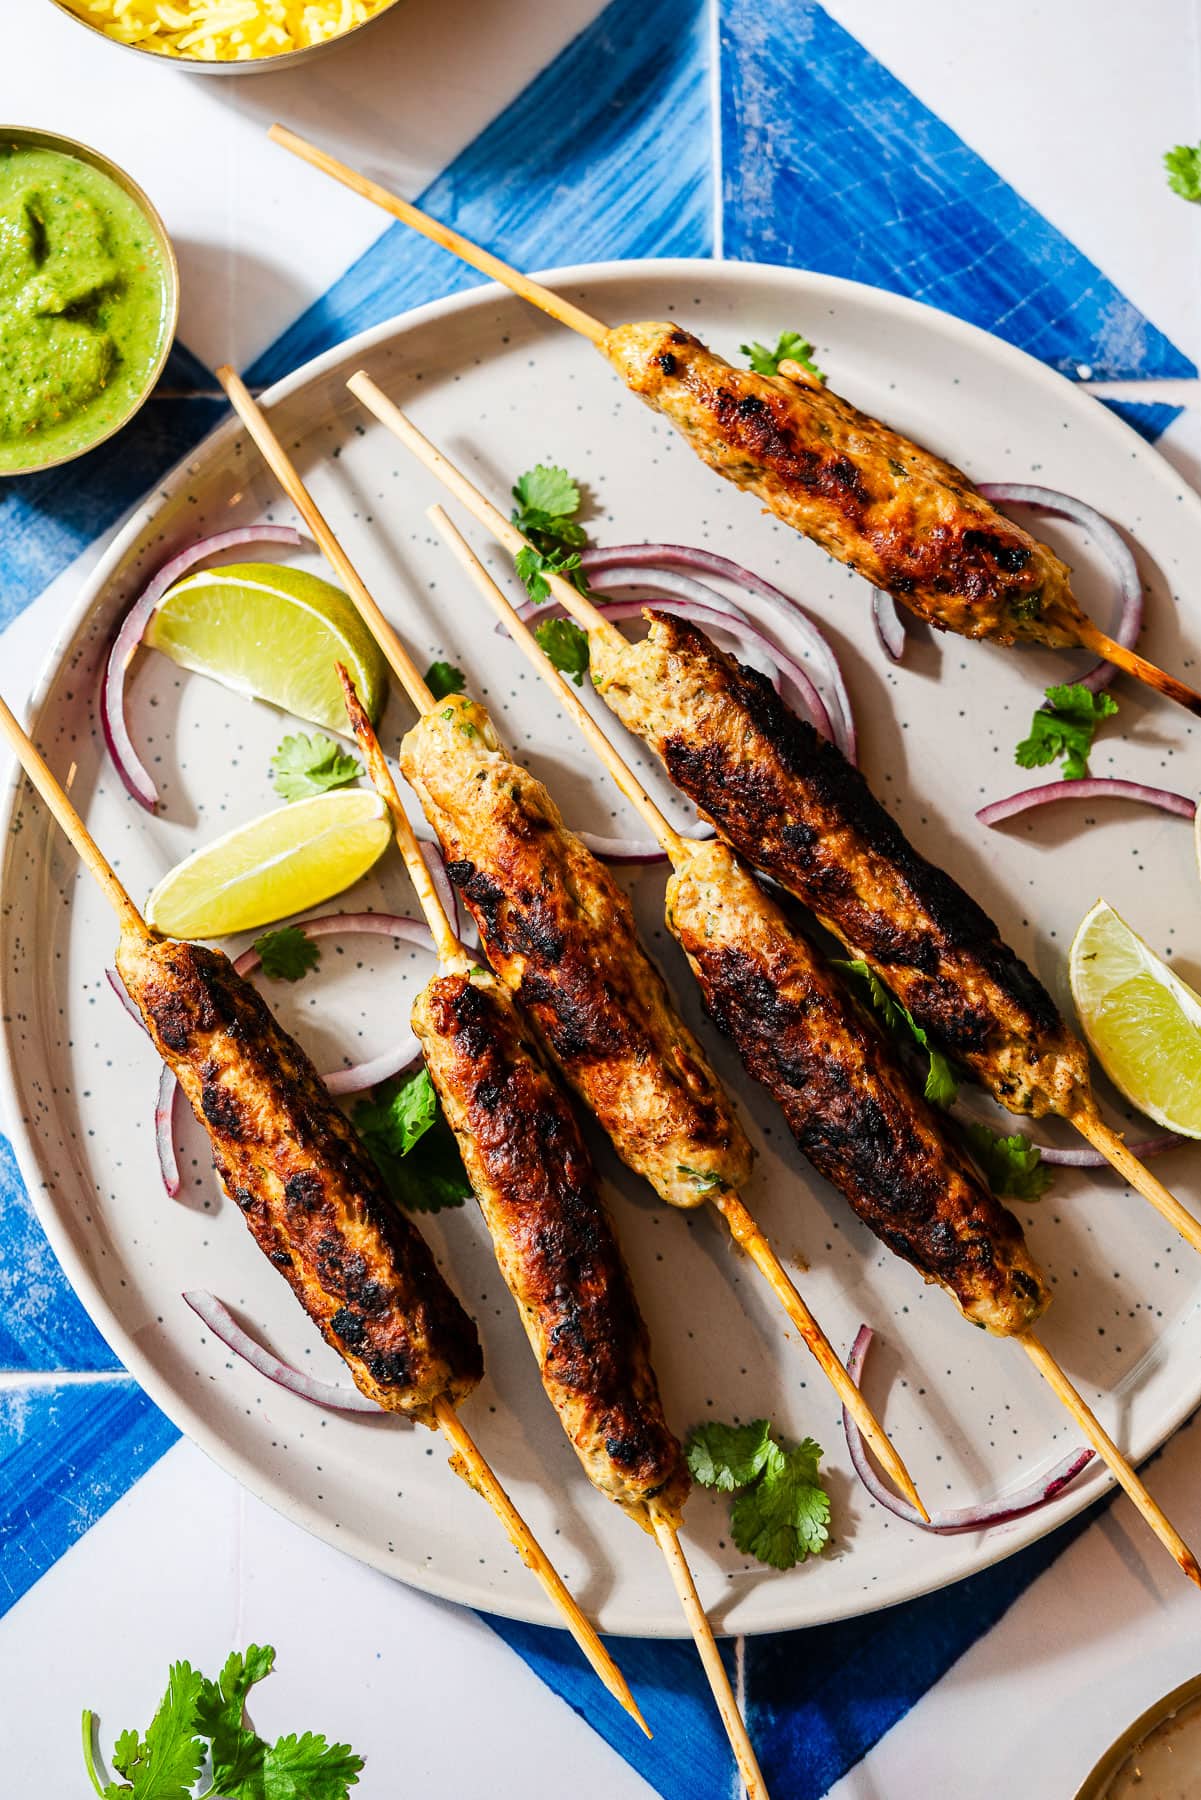 Chicken seekh kebabs on skewers in a plate with limes, onion, and cilantro.